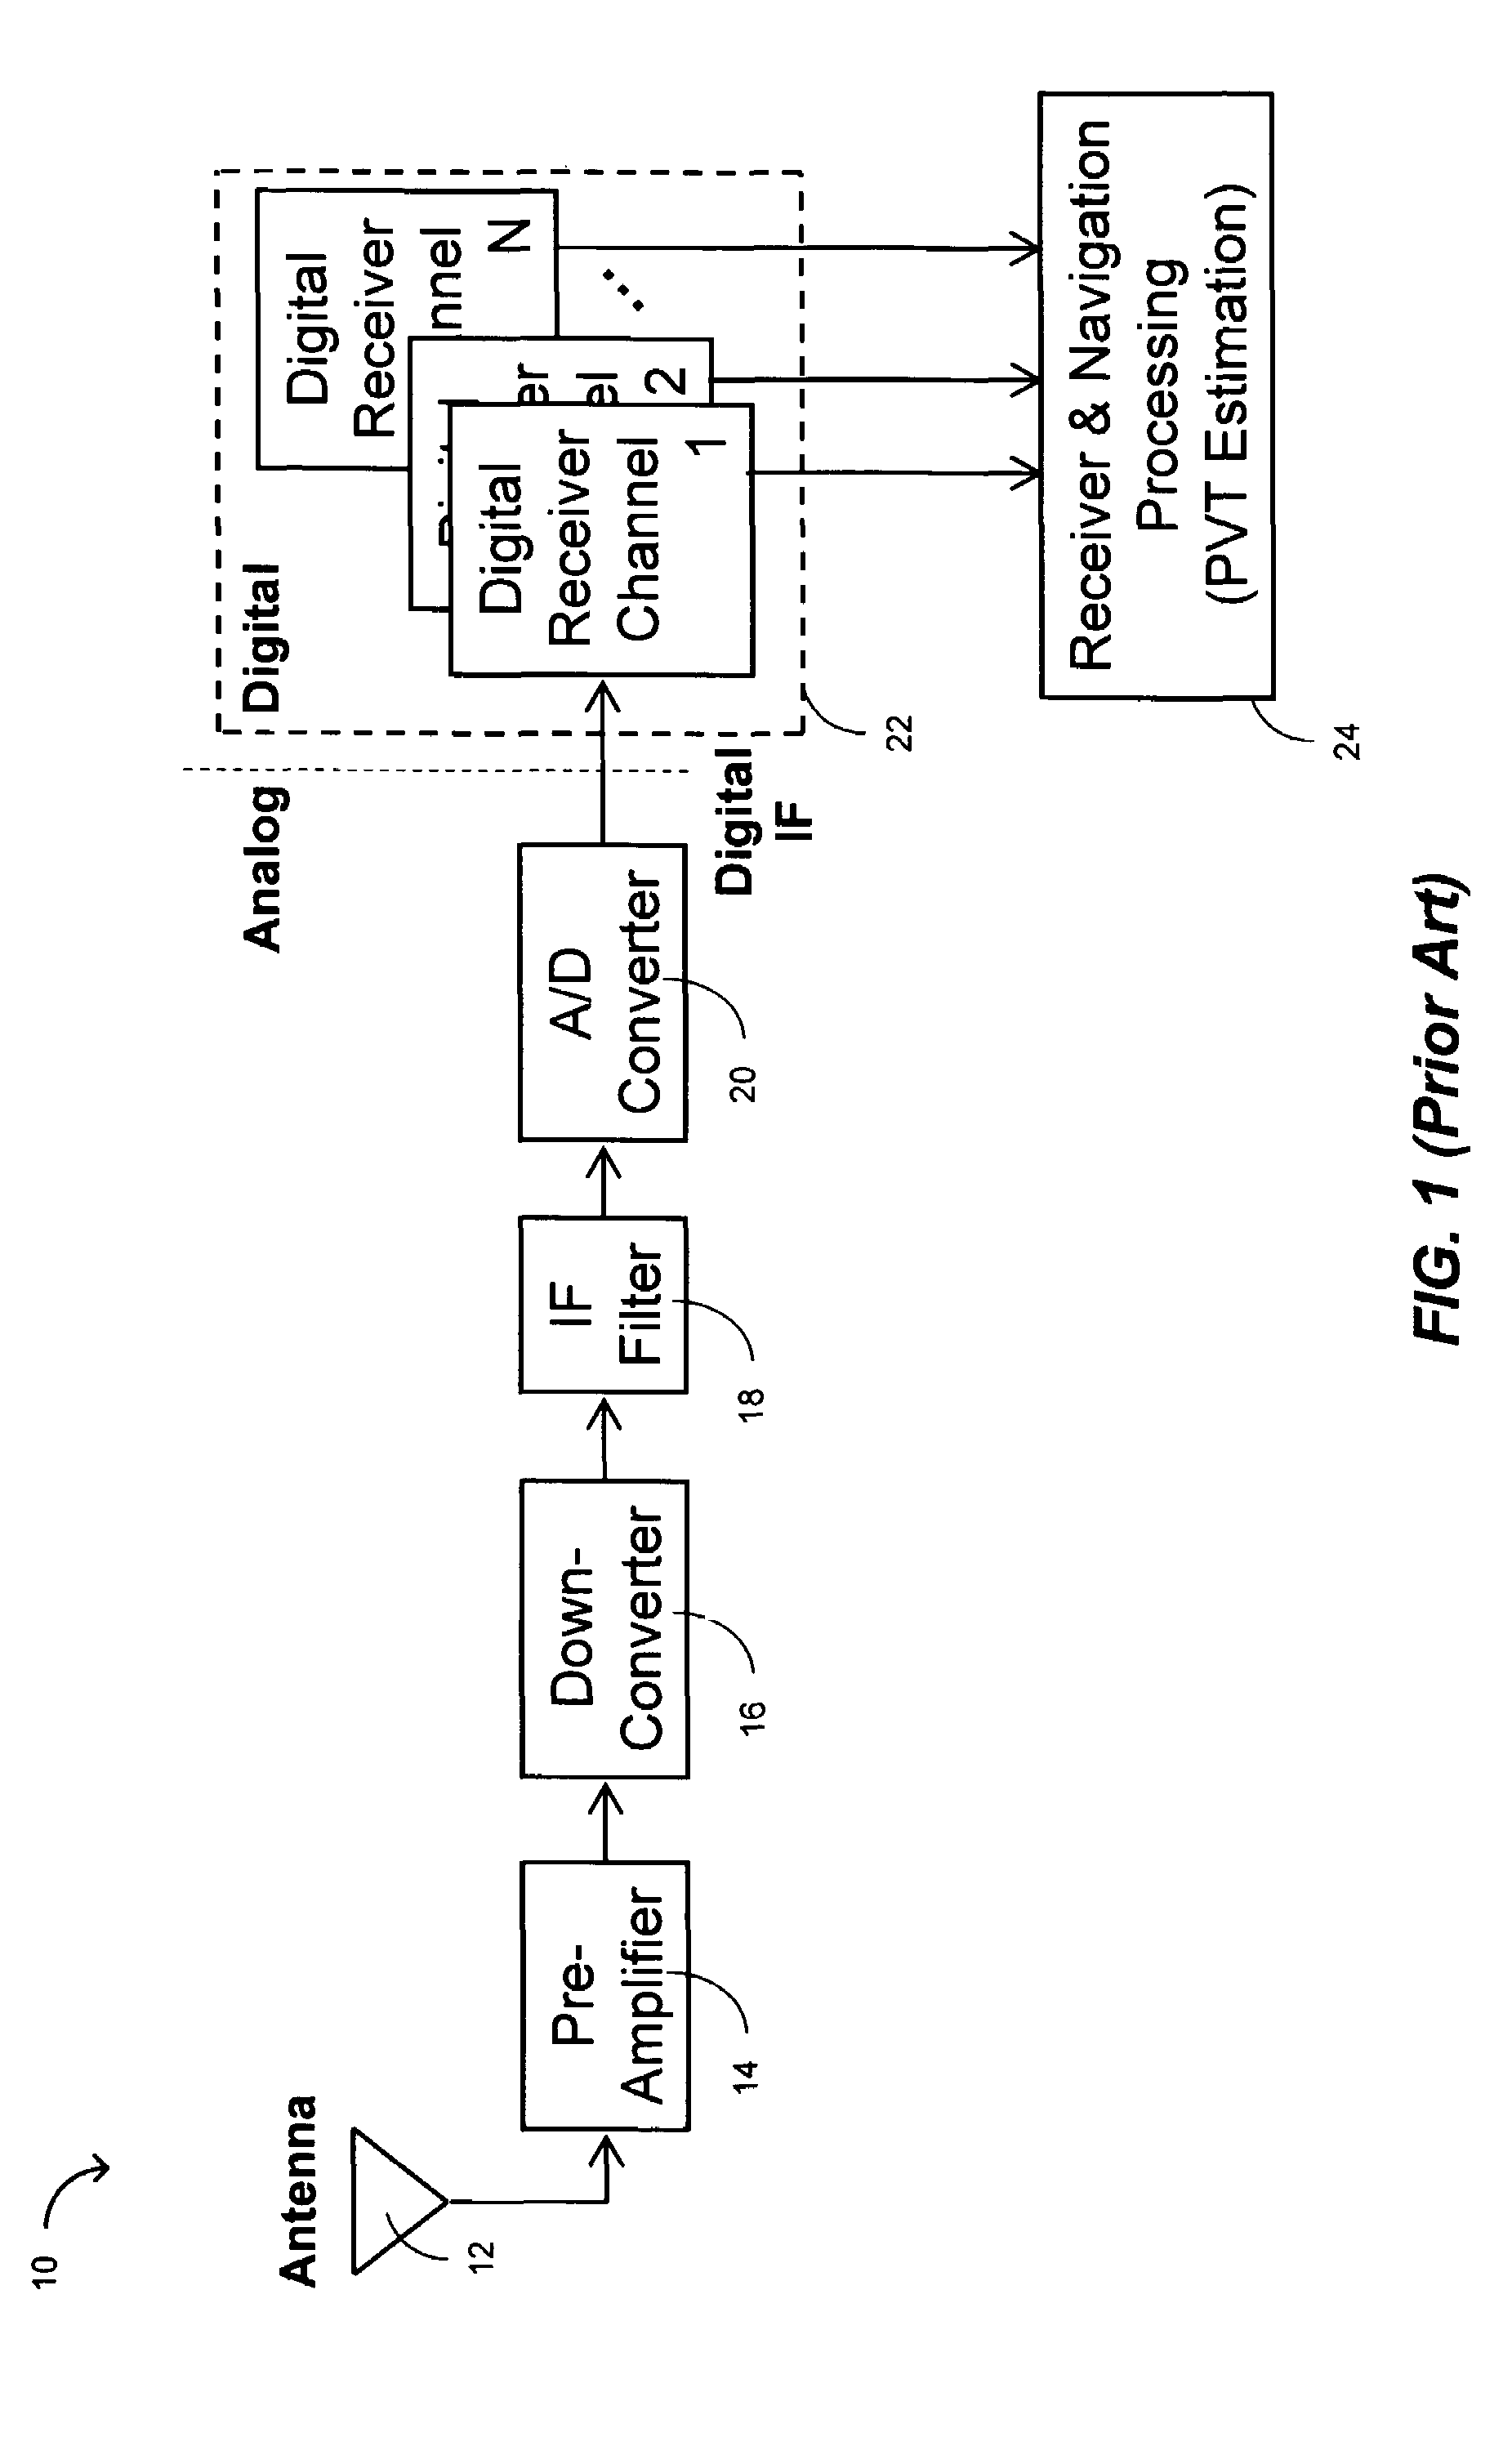 Method and apparatus for frequency discriminator and data demodulation in frequency lock loop of digital code division multiple access (CDMA) receivers